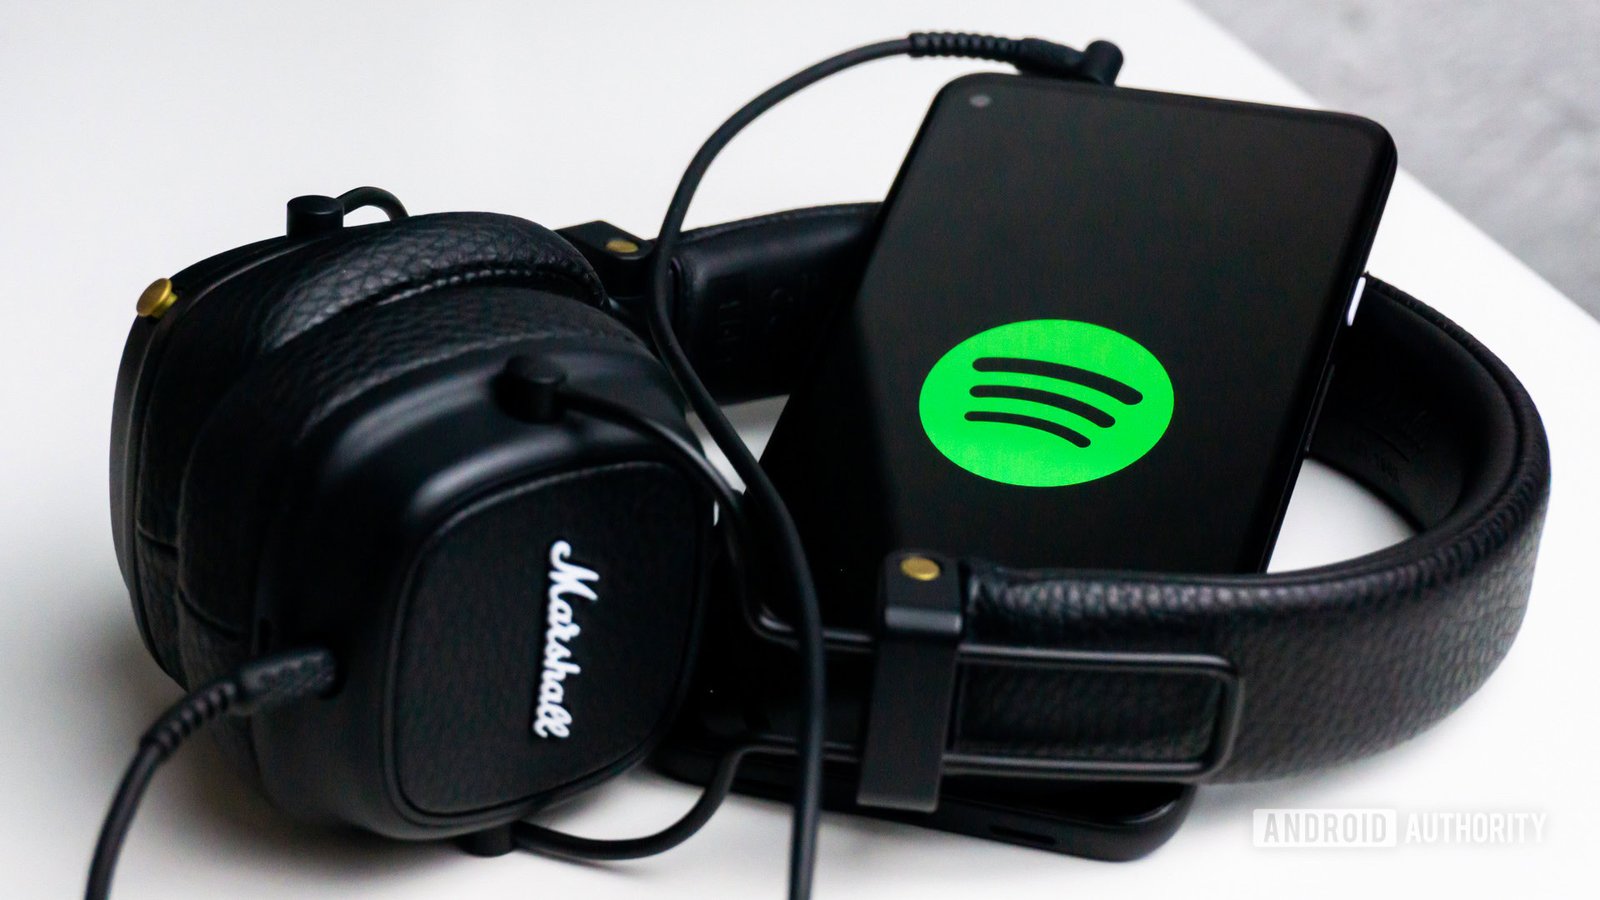 New Spotify ‘Basic’ plan focuses only on music and podcasts